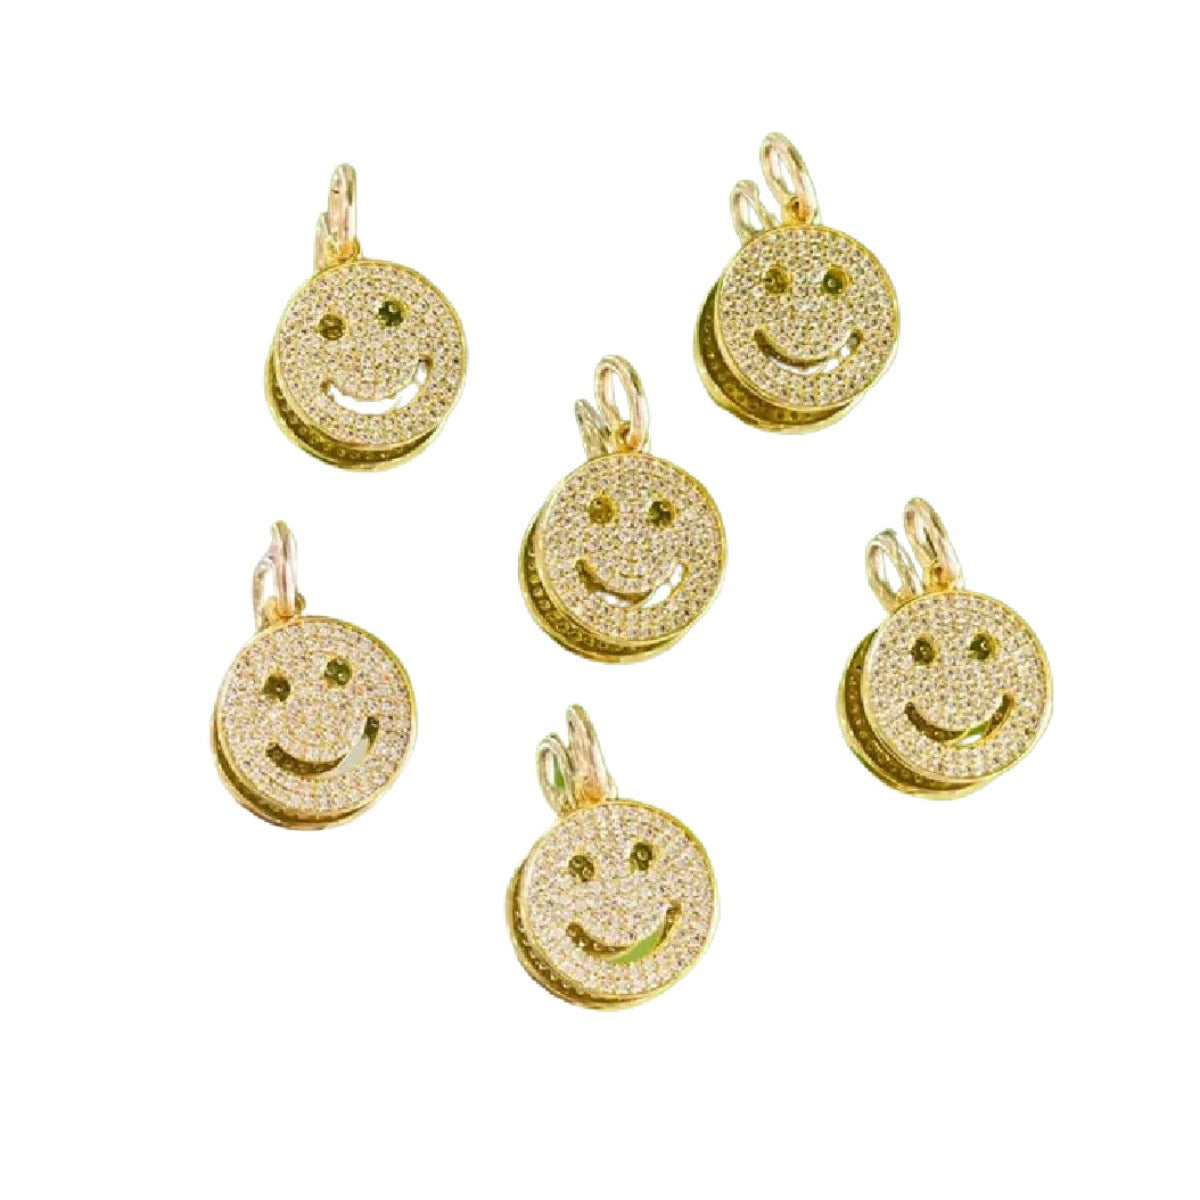 Smiley Face Charm